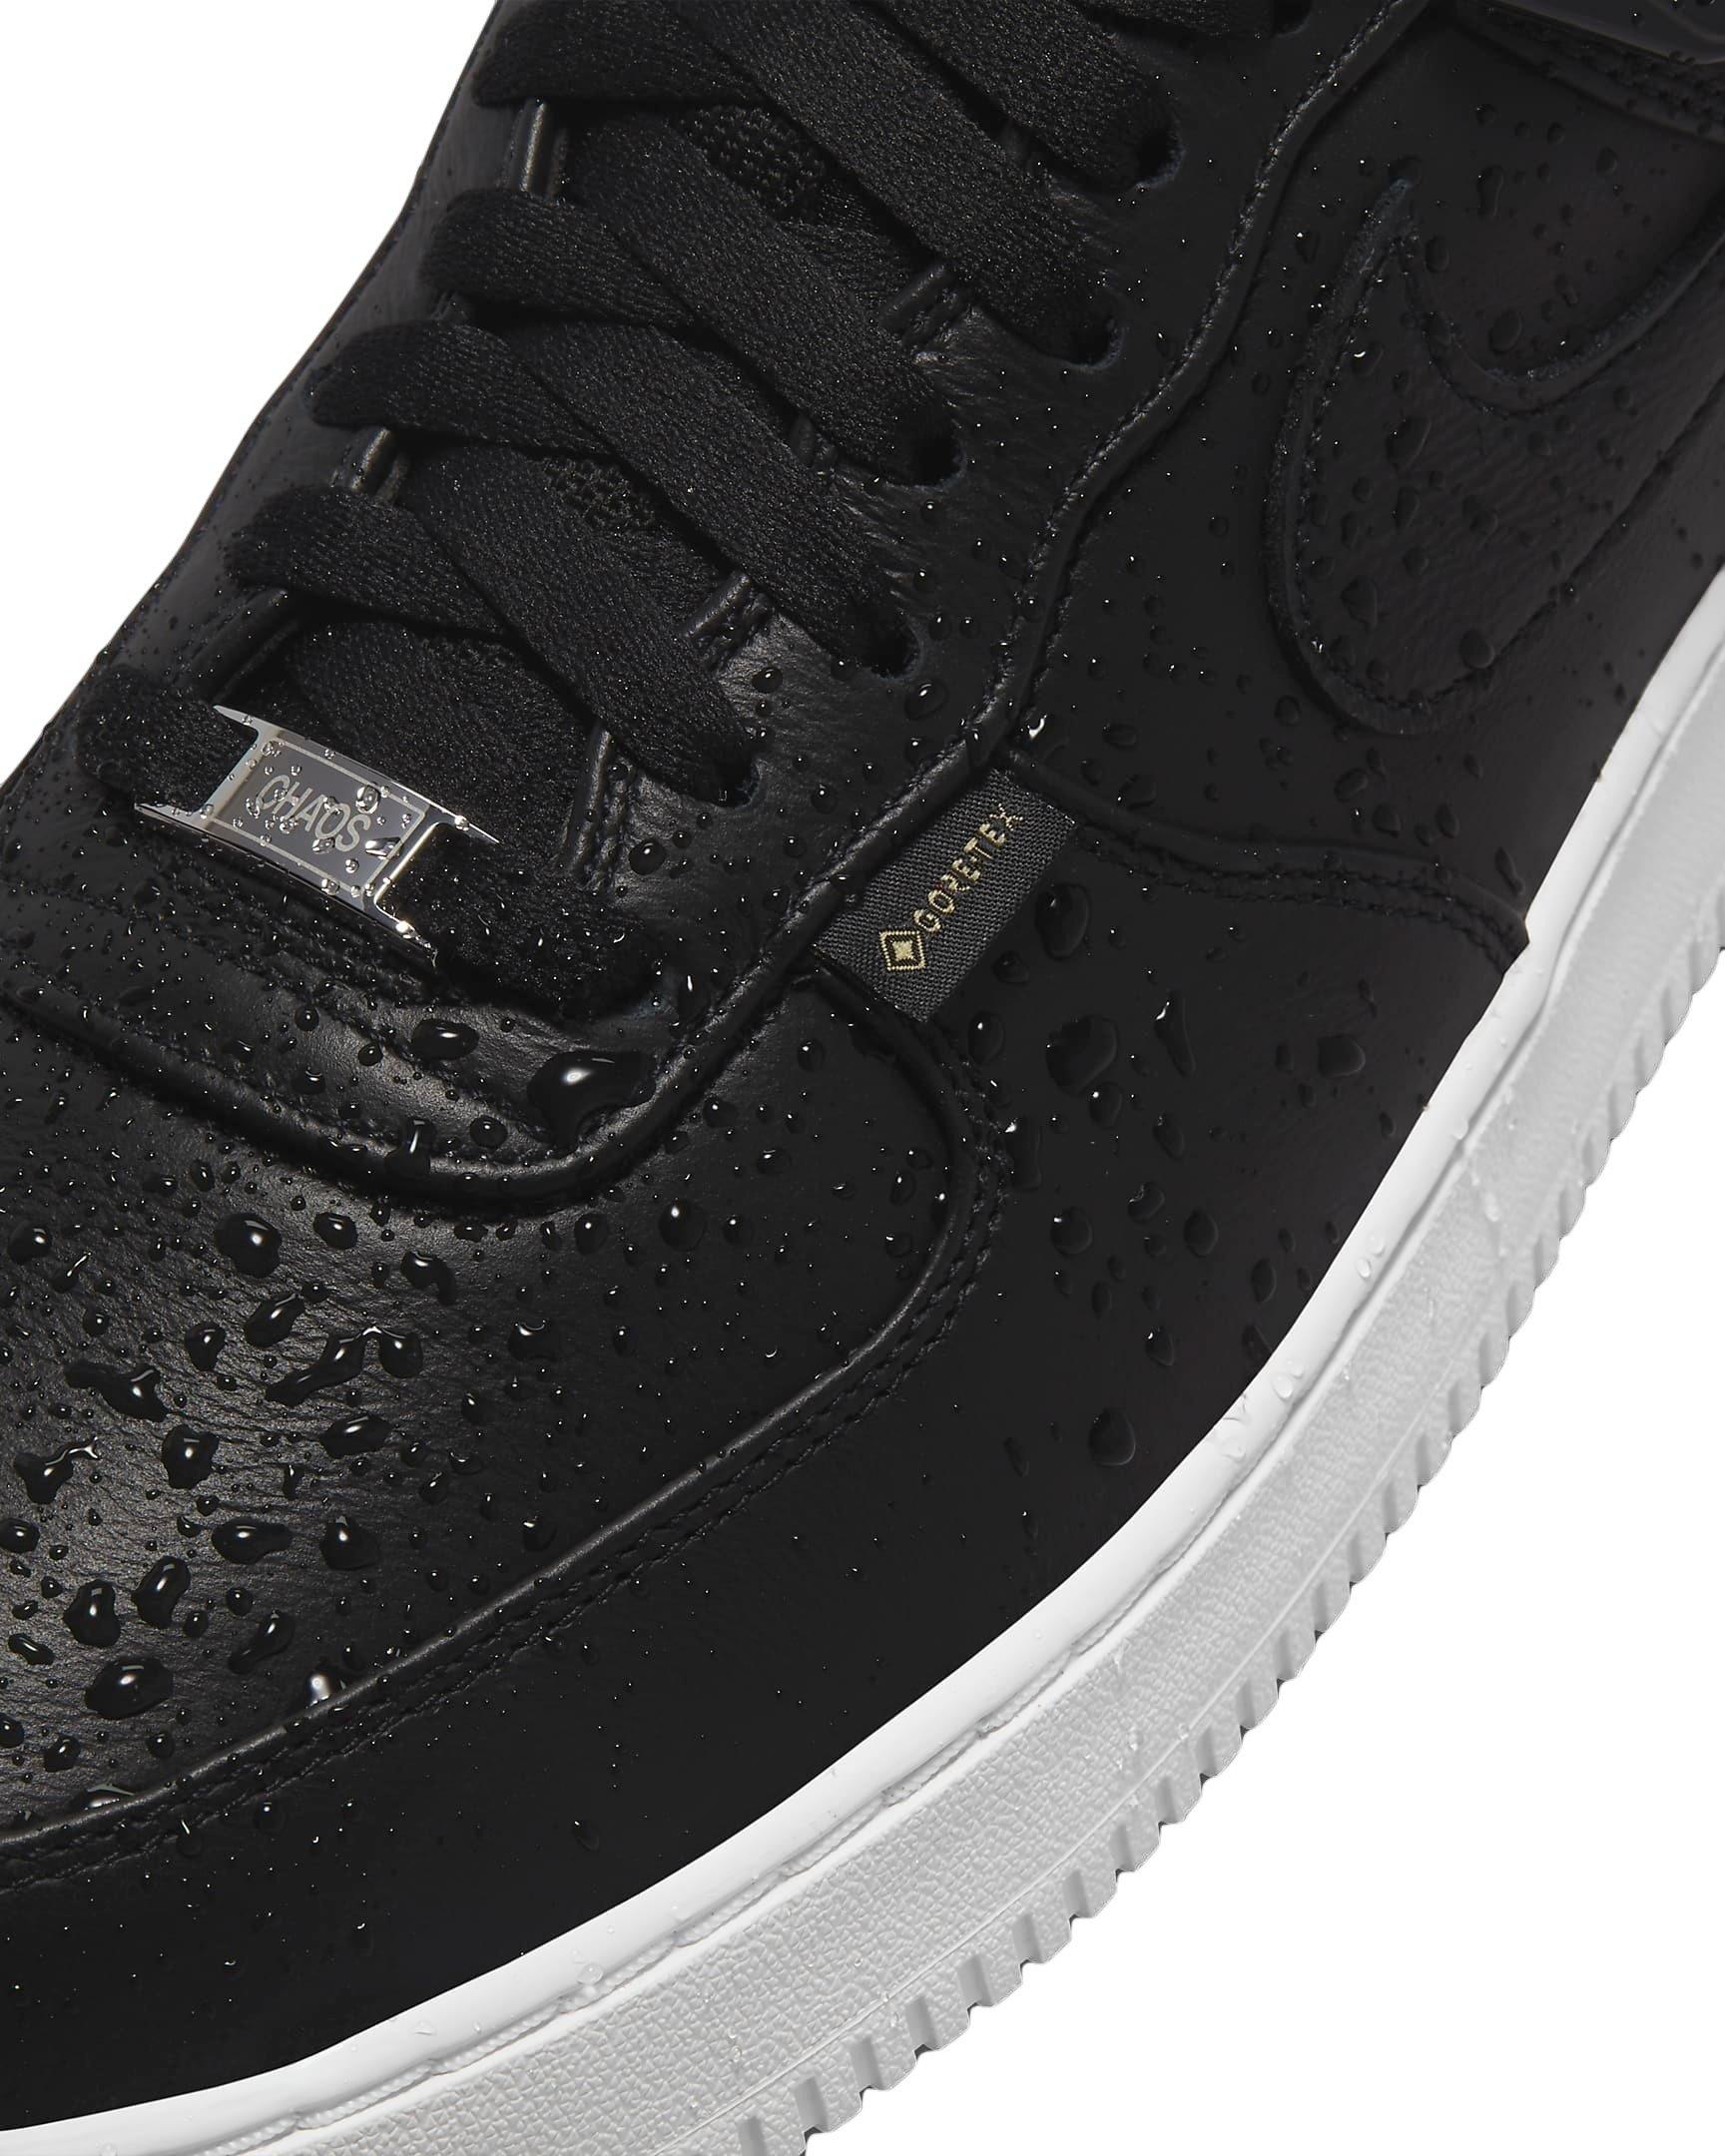 Nike Air Force 1 Low SP x UNDERCOVER Men's Shoes.